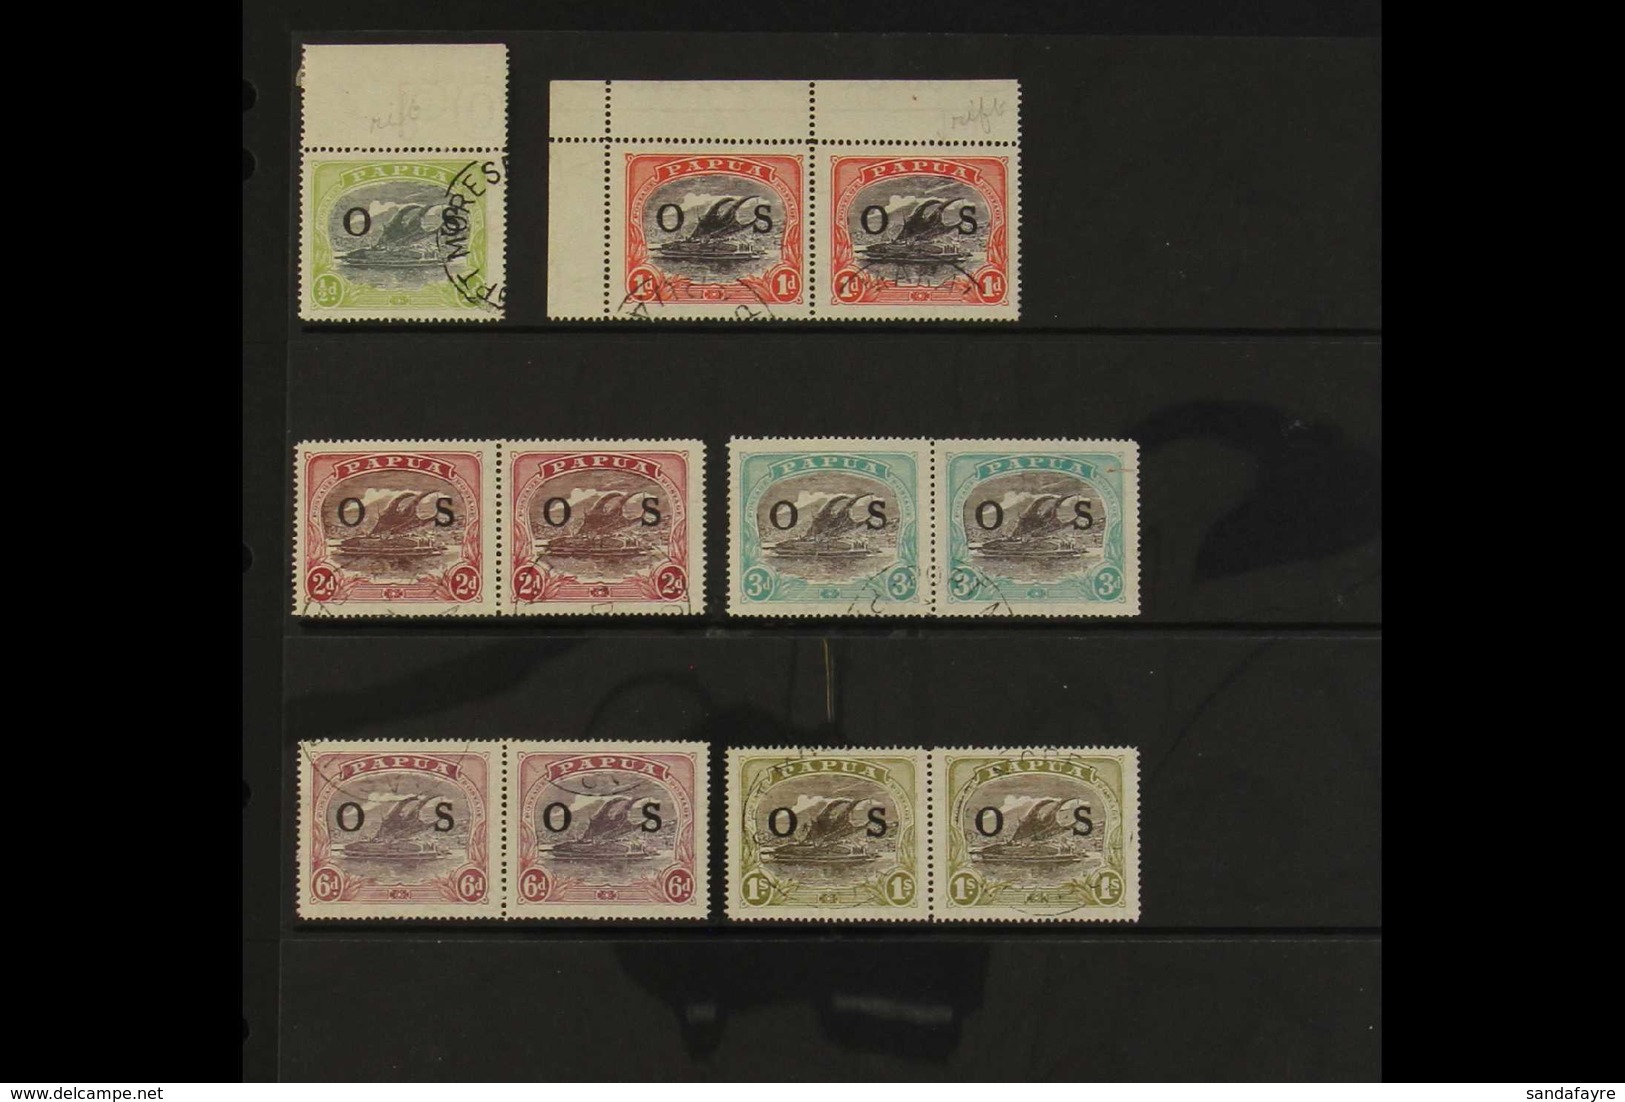 OFFICIALS WITH "RIFT IN CLOUD" FLAW 1931-32 "O S" Overprinted Fine Used Range Of The Variety With ½d Single Upper Margin - Papua New Guinea